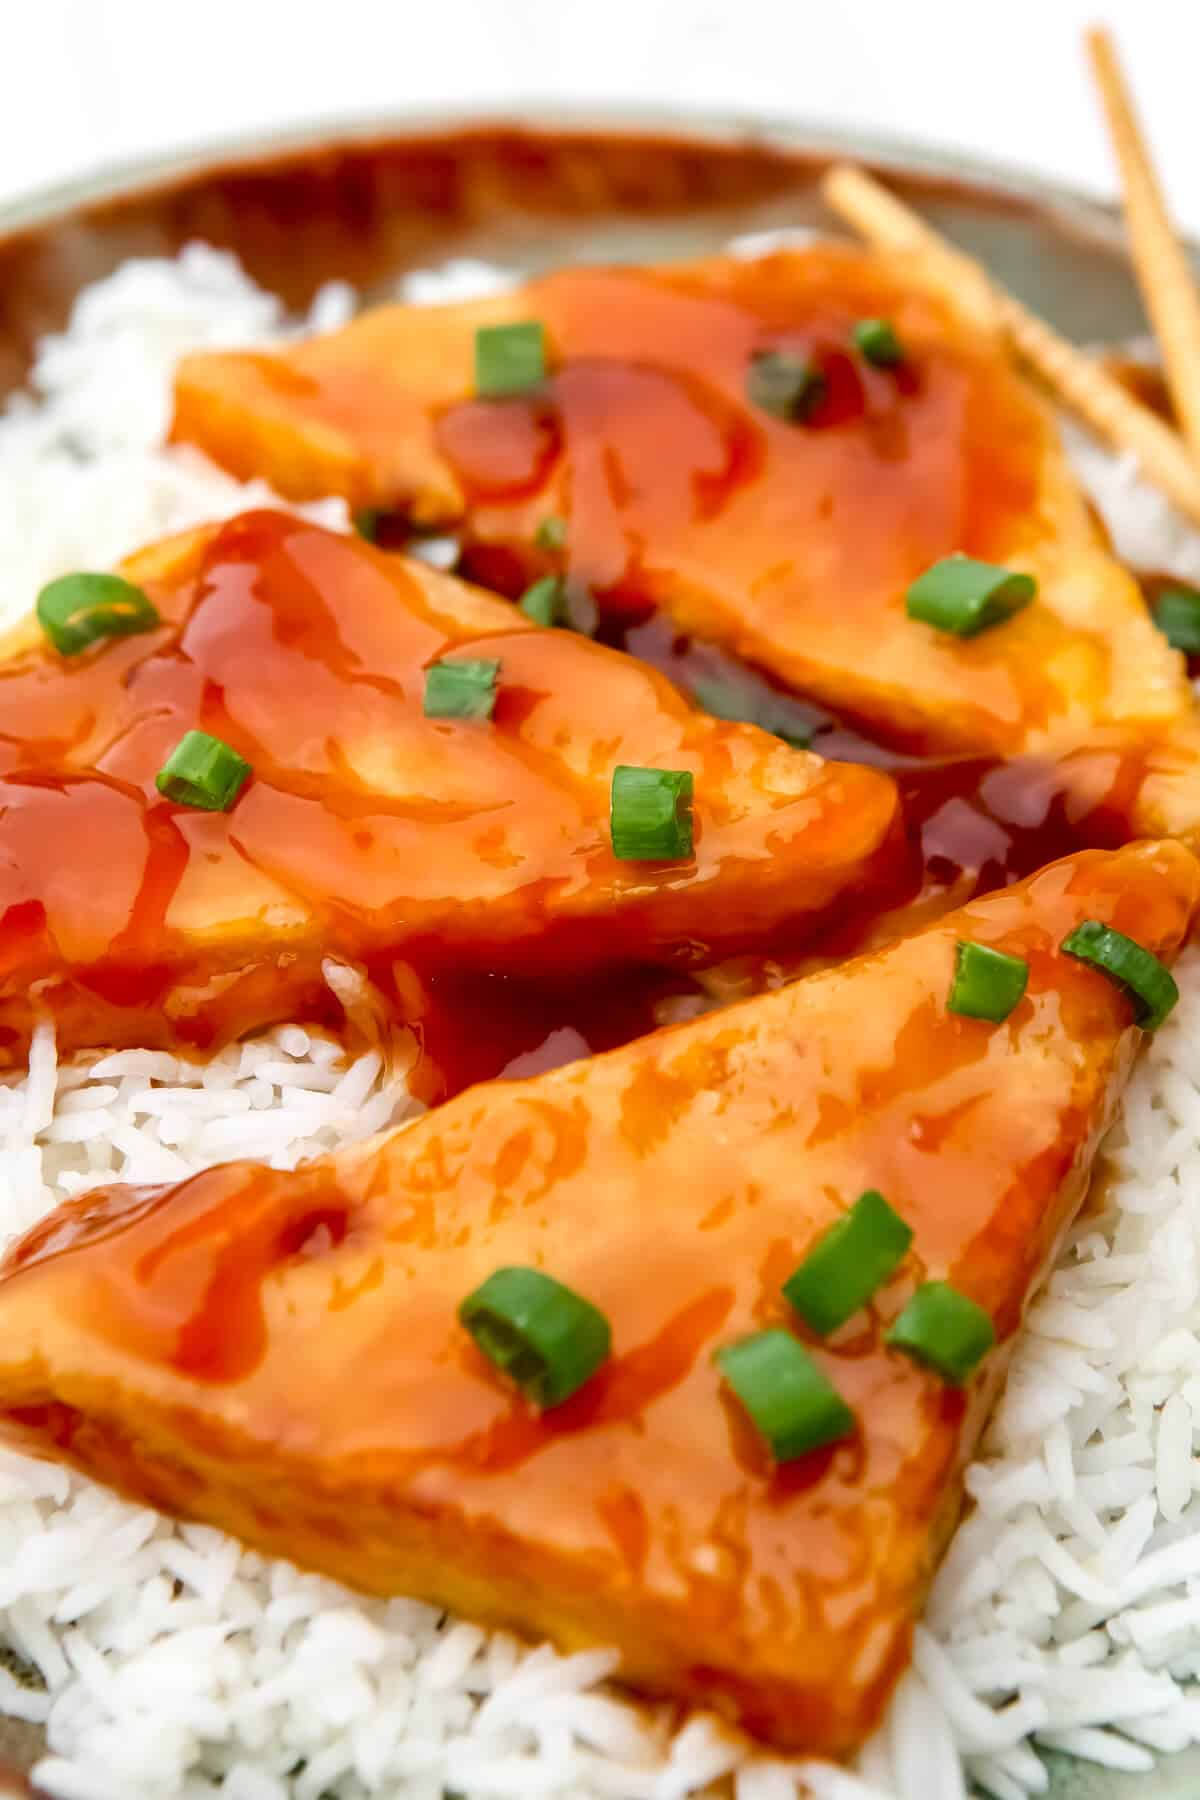 A close up of sweet sticky tofu on a bed of white rice.